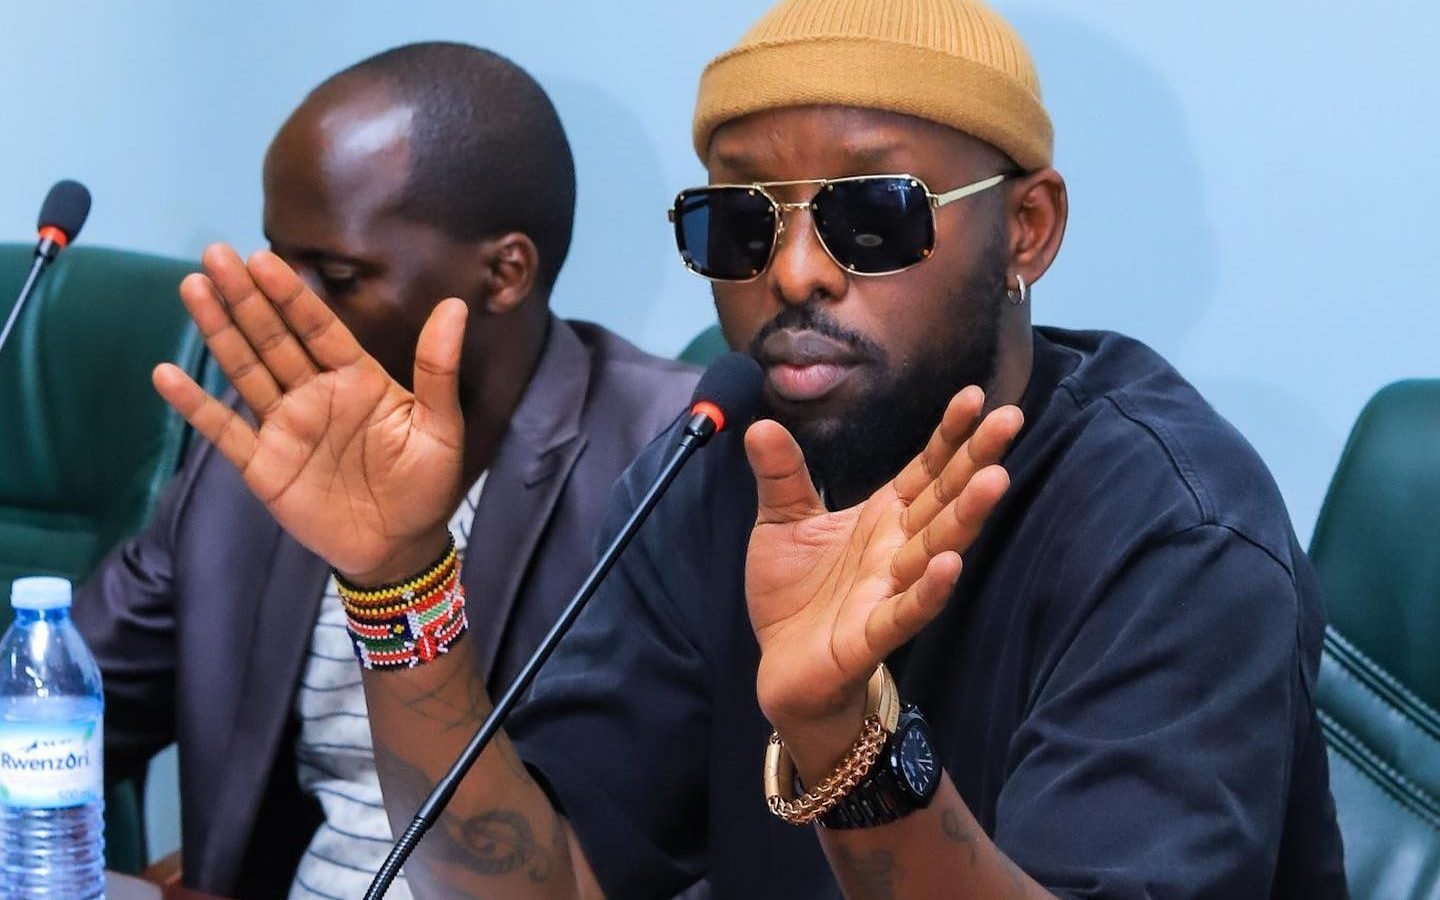 eddy-kenzo-endorses-ai-use-with-consent-from-late-artist’s-family